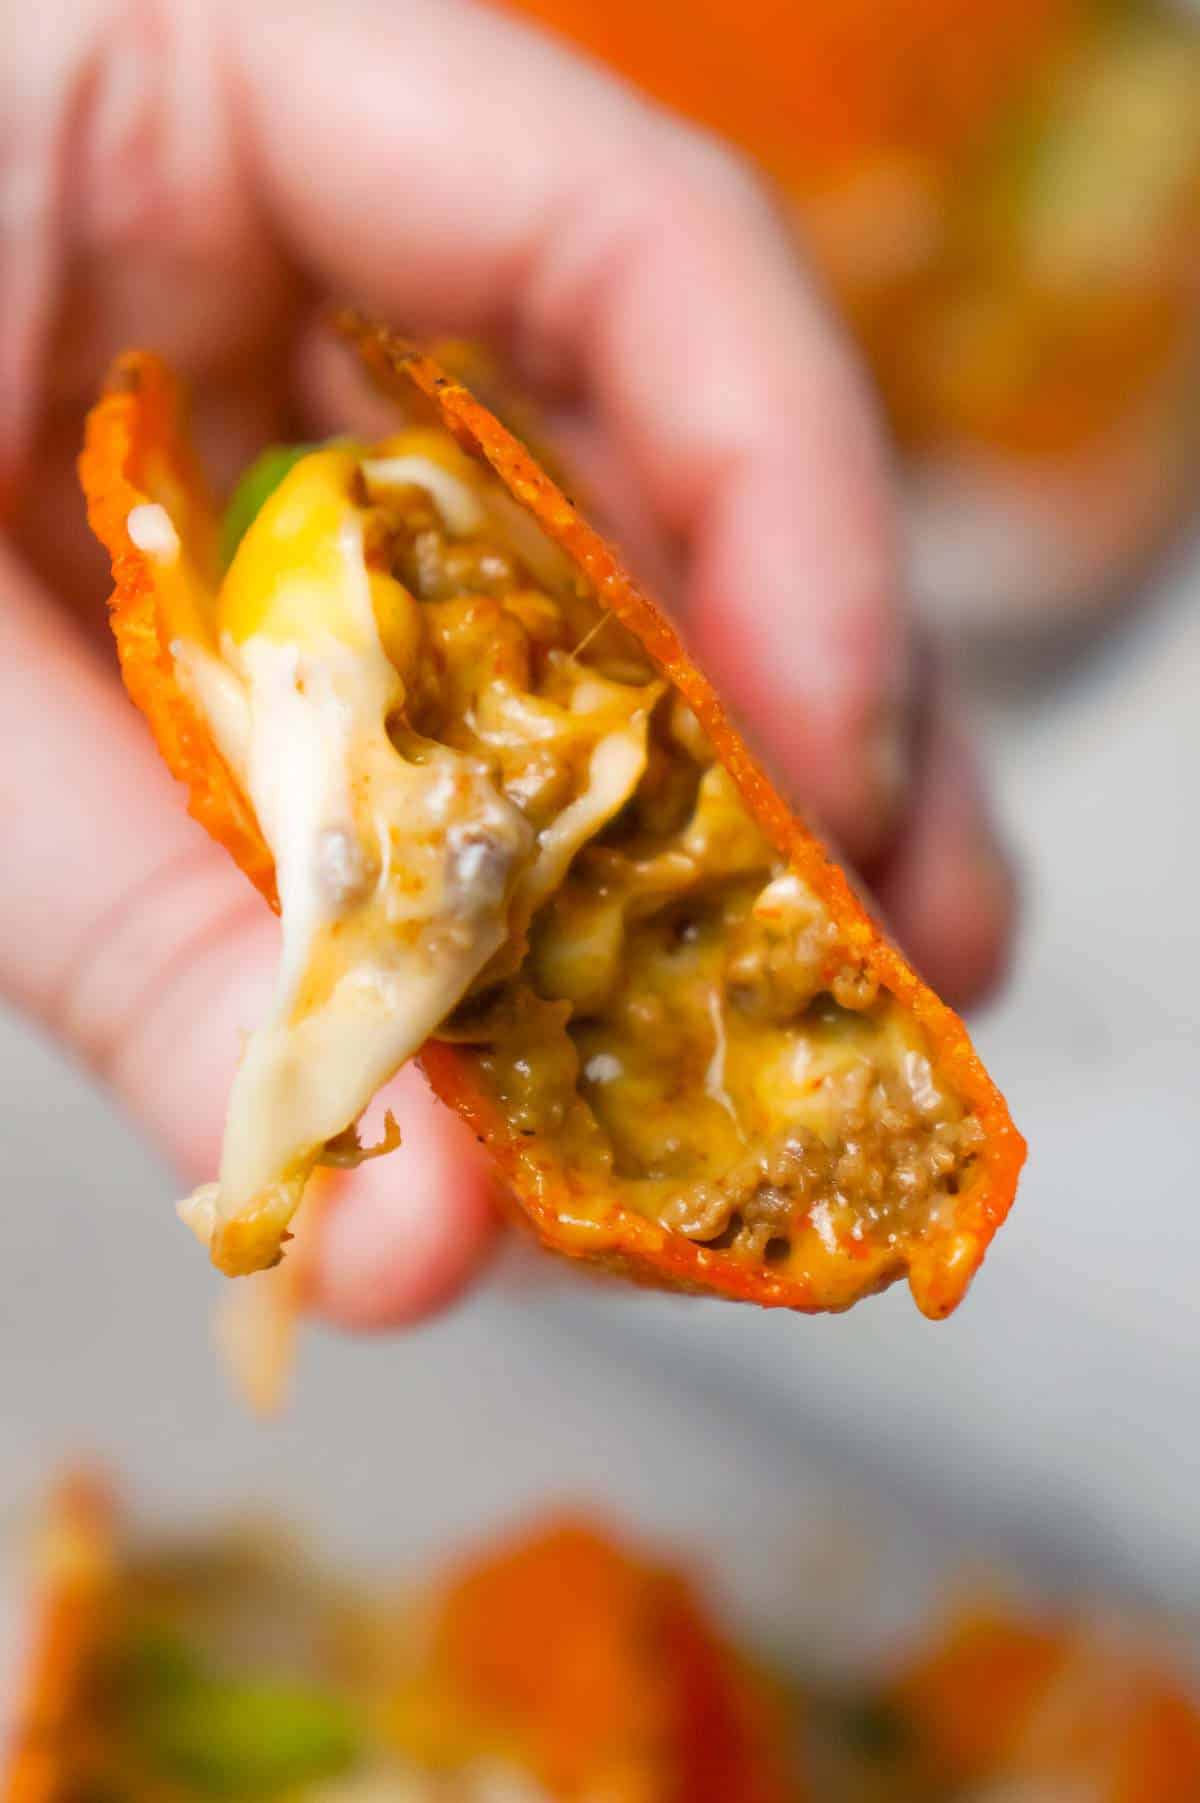 Extra Cheesy Baked Beef Tacos are an easy weeknight dinner recipe using ground beef, salsa con queso cheese dip, shredded mozzarella and cheddar and nacho cheese flavoured stand and stuff taco shells.